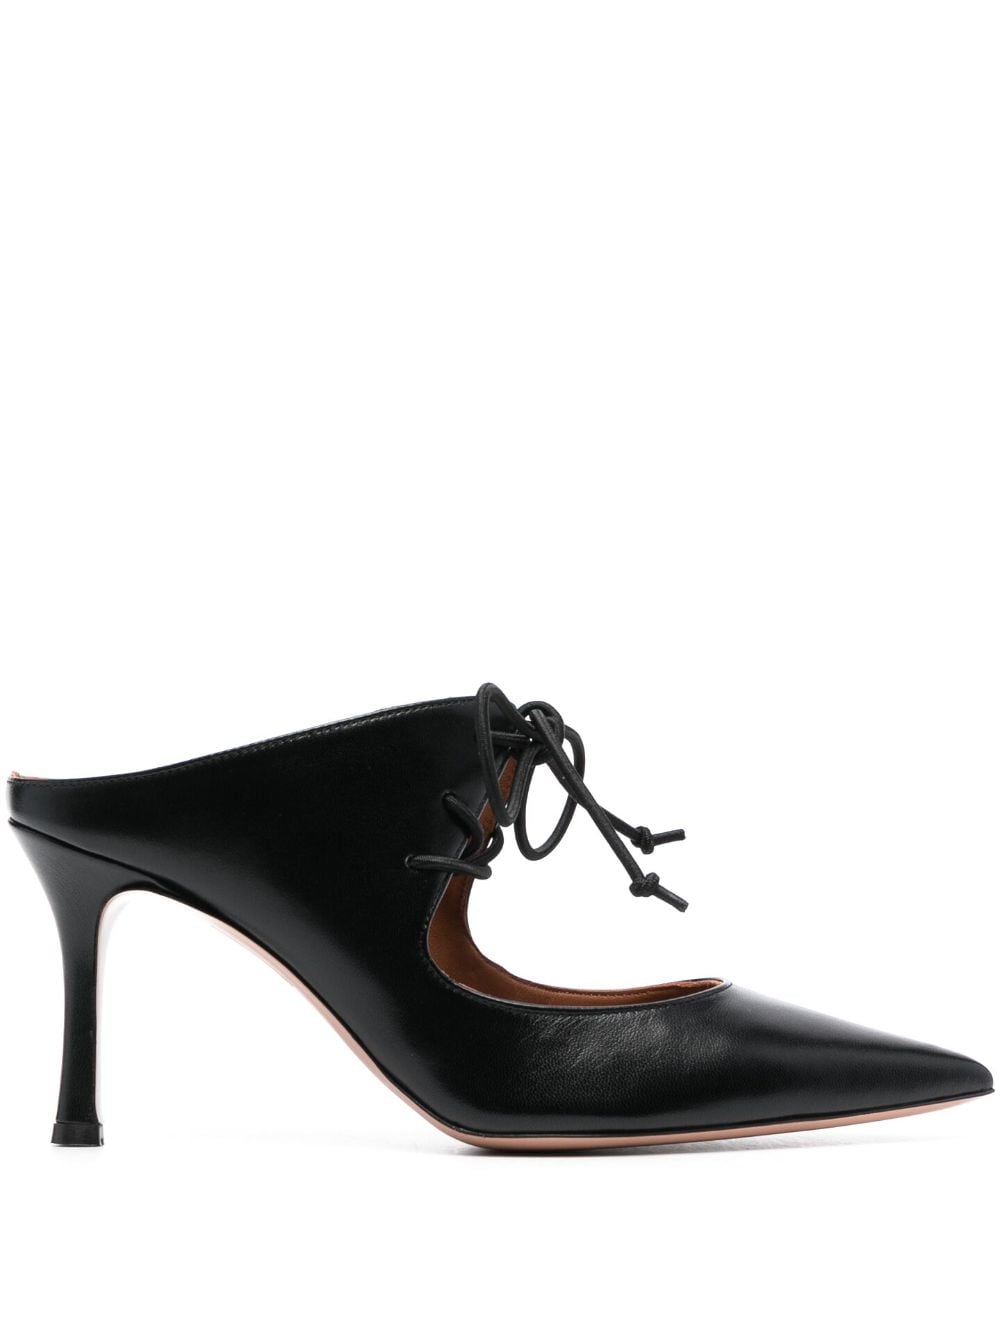 Malone Souliers Marcia 85mm leather pumps - Black von Malone Souliers